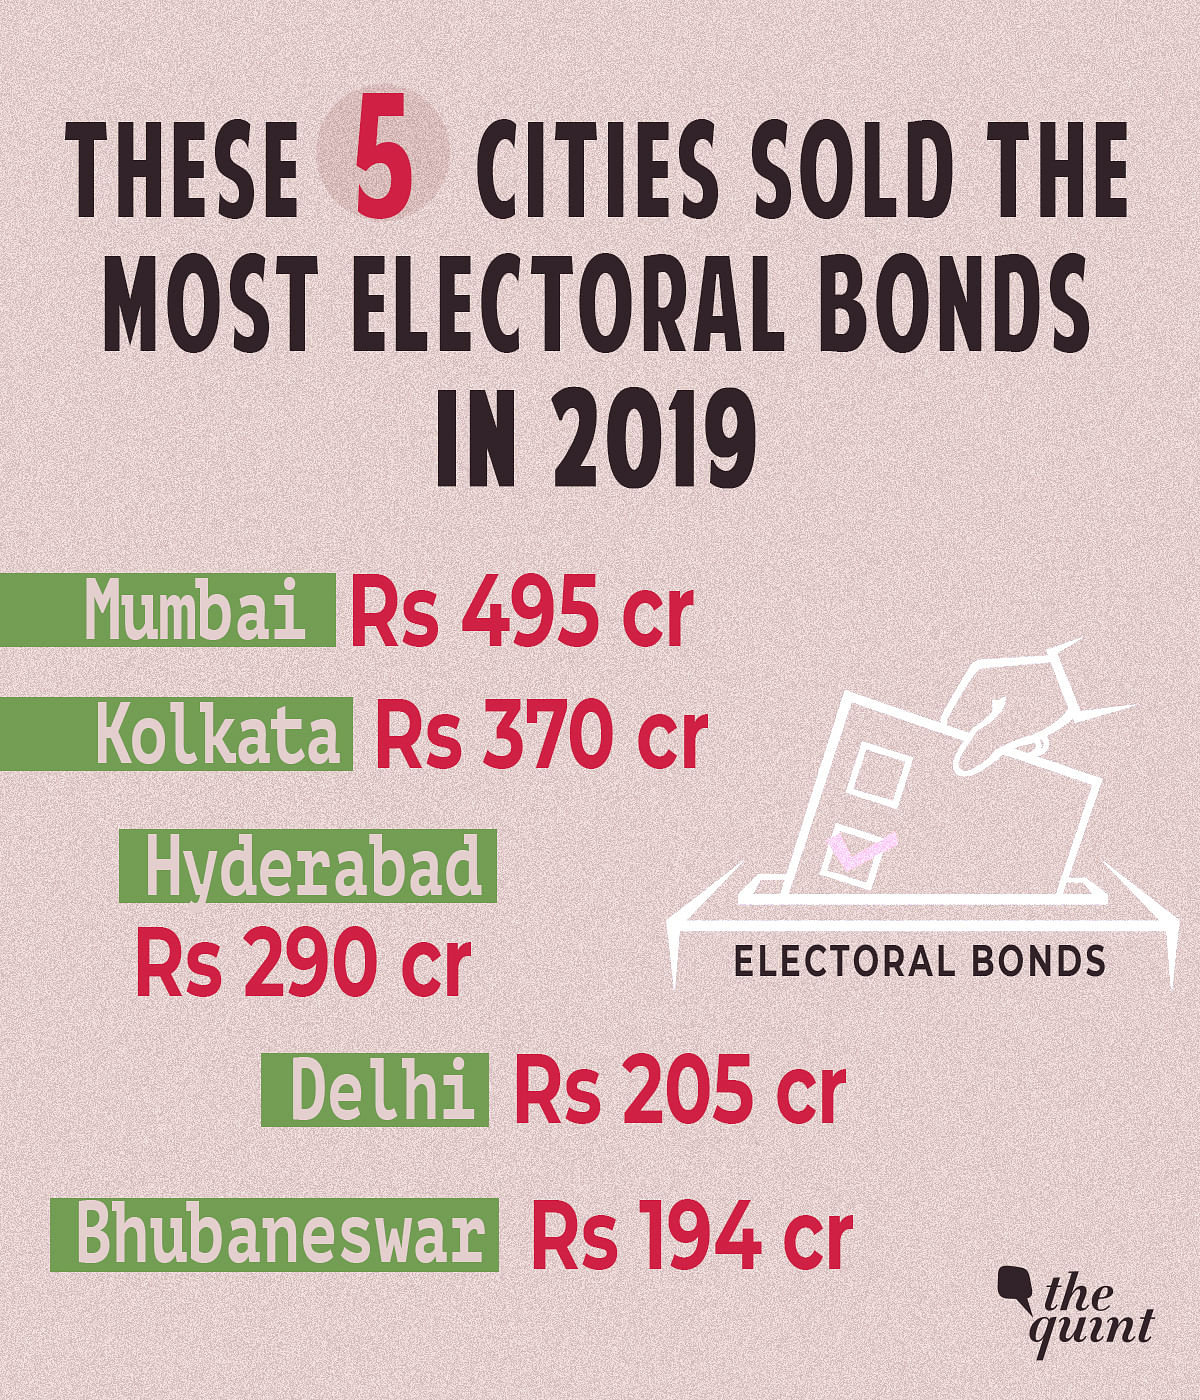 Electoral bonds will play a critical role in Lok Sabha elections, which is dangerous  for democracy, say experts.